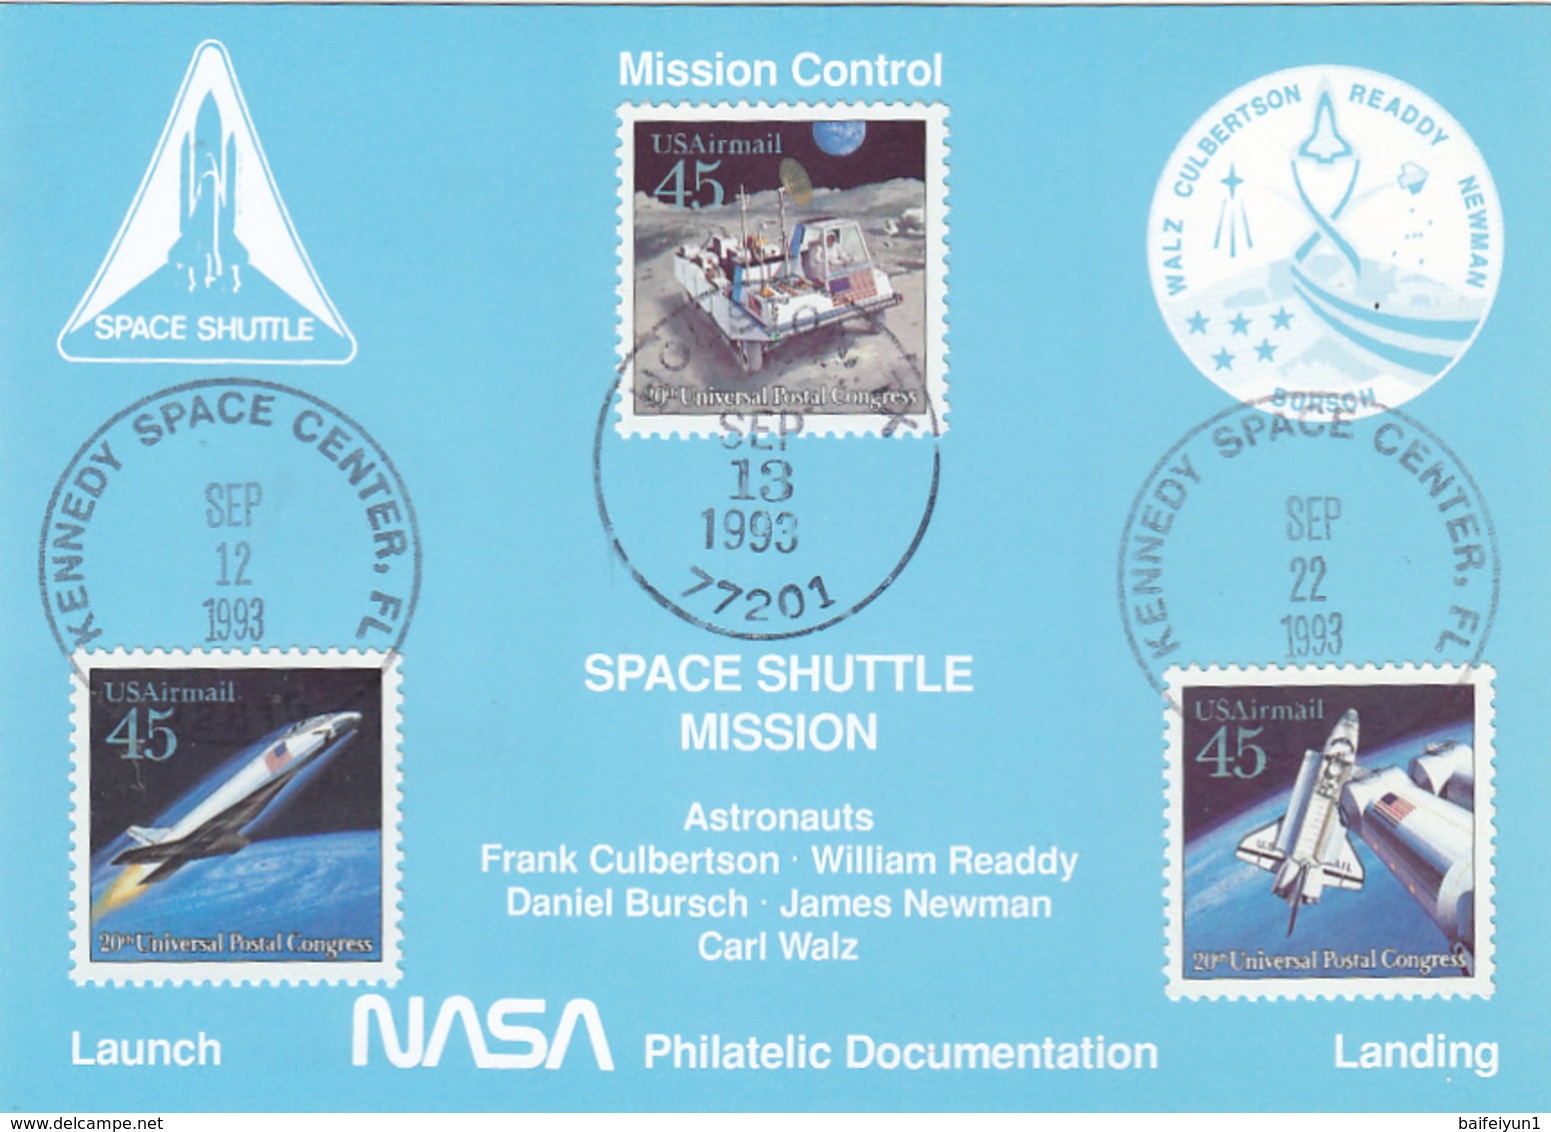 1993 USA Space Shuttle Discovery STS-51 Postal Card - Nordamerika